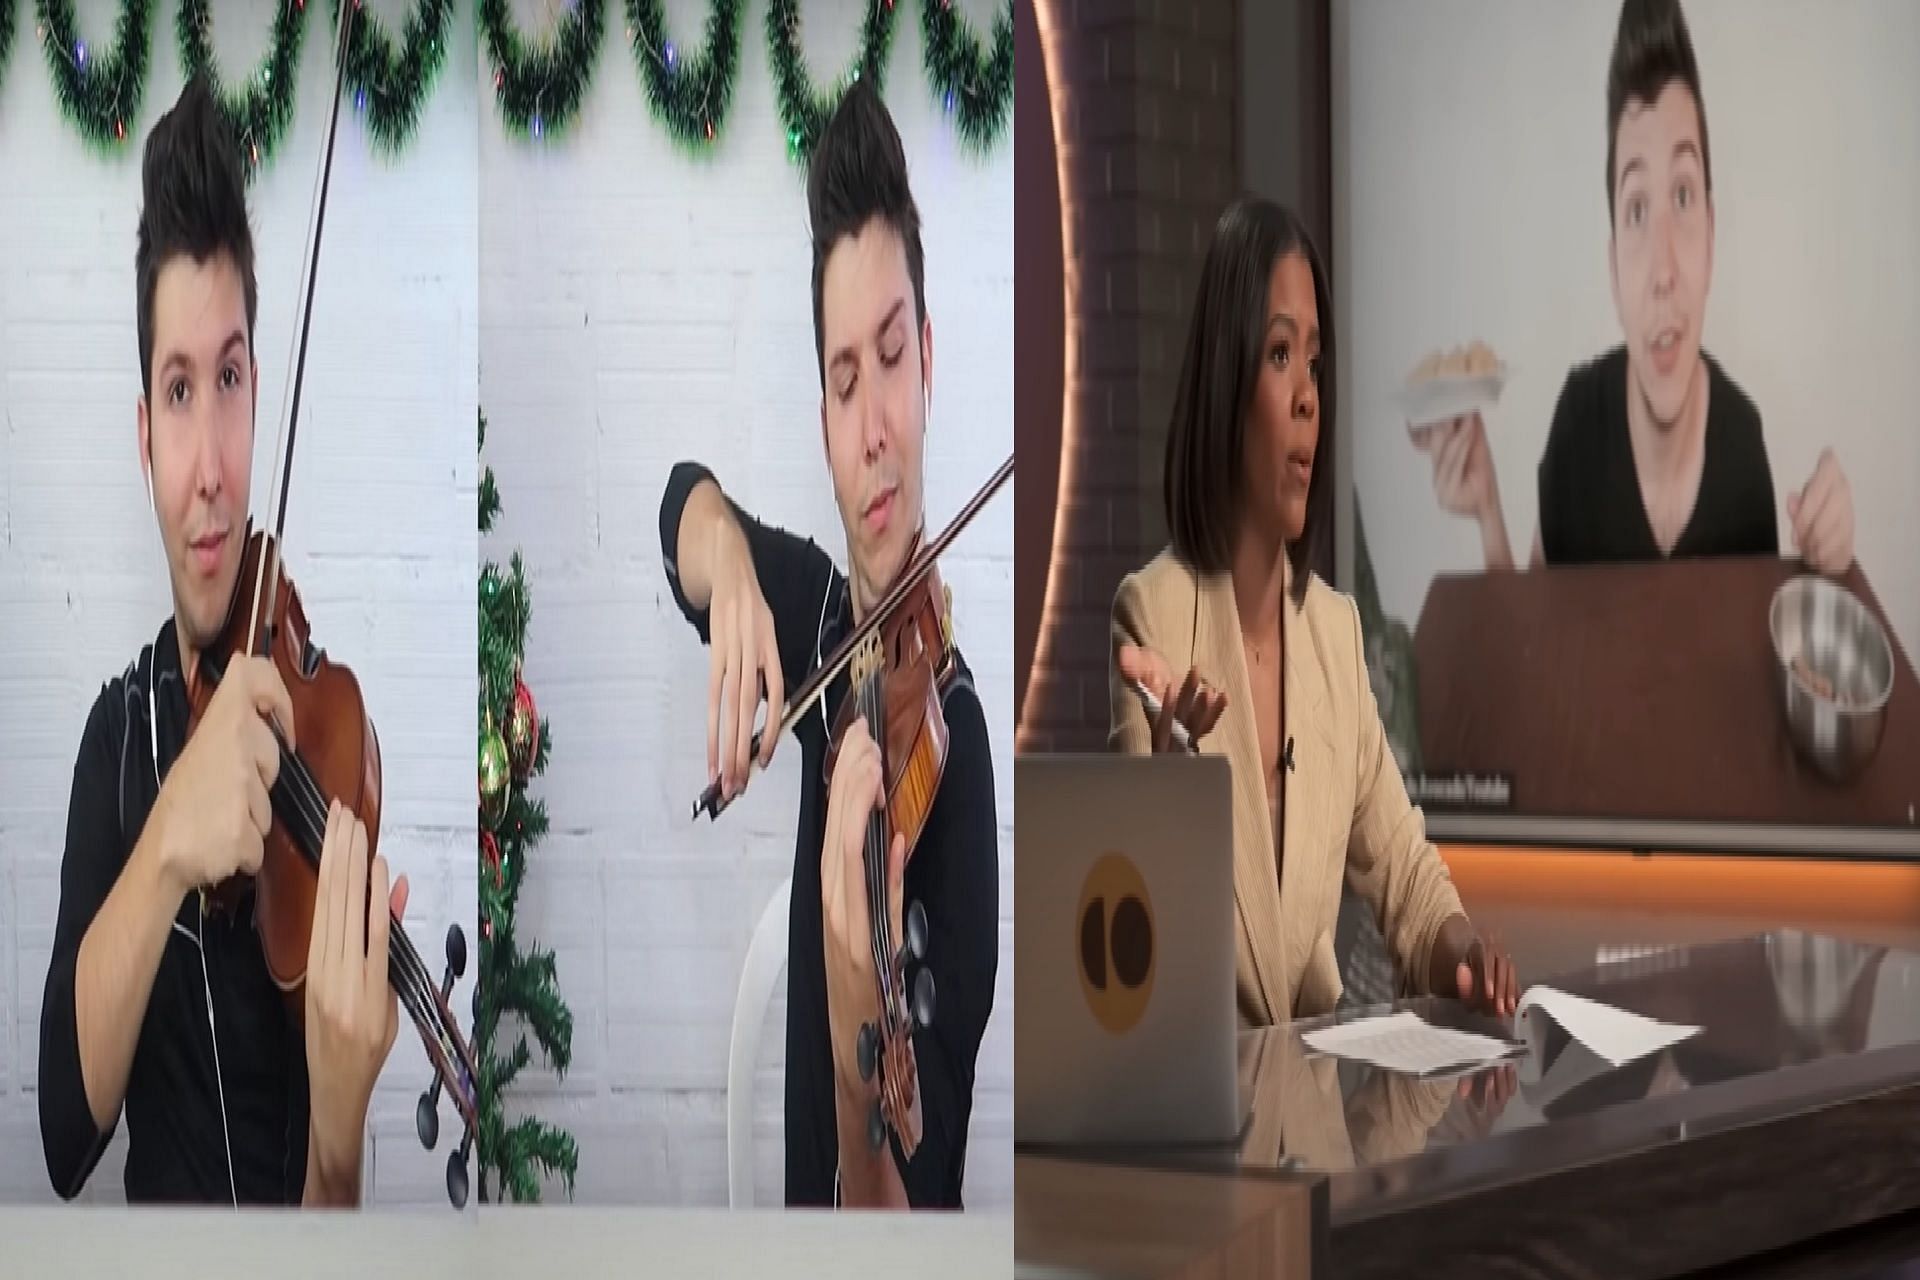 Nikocado Avocado and Candace Owens YouTube video goes viral after former reacts to it (Image via snip from YouTube (Left- Nikocado Avocado) (Right- Candace Owens)